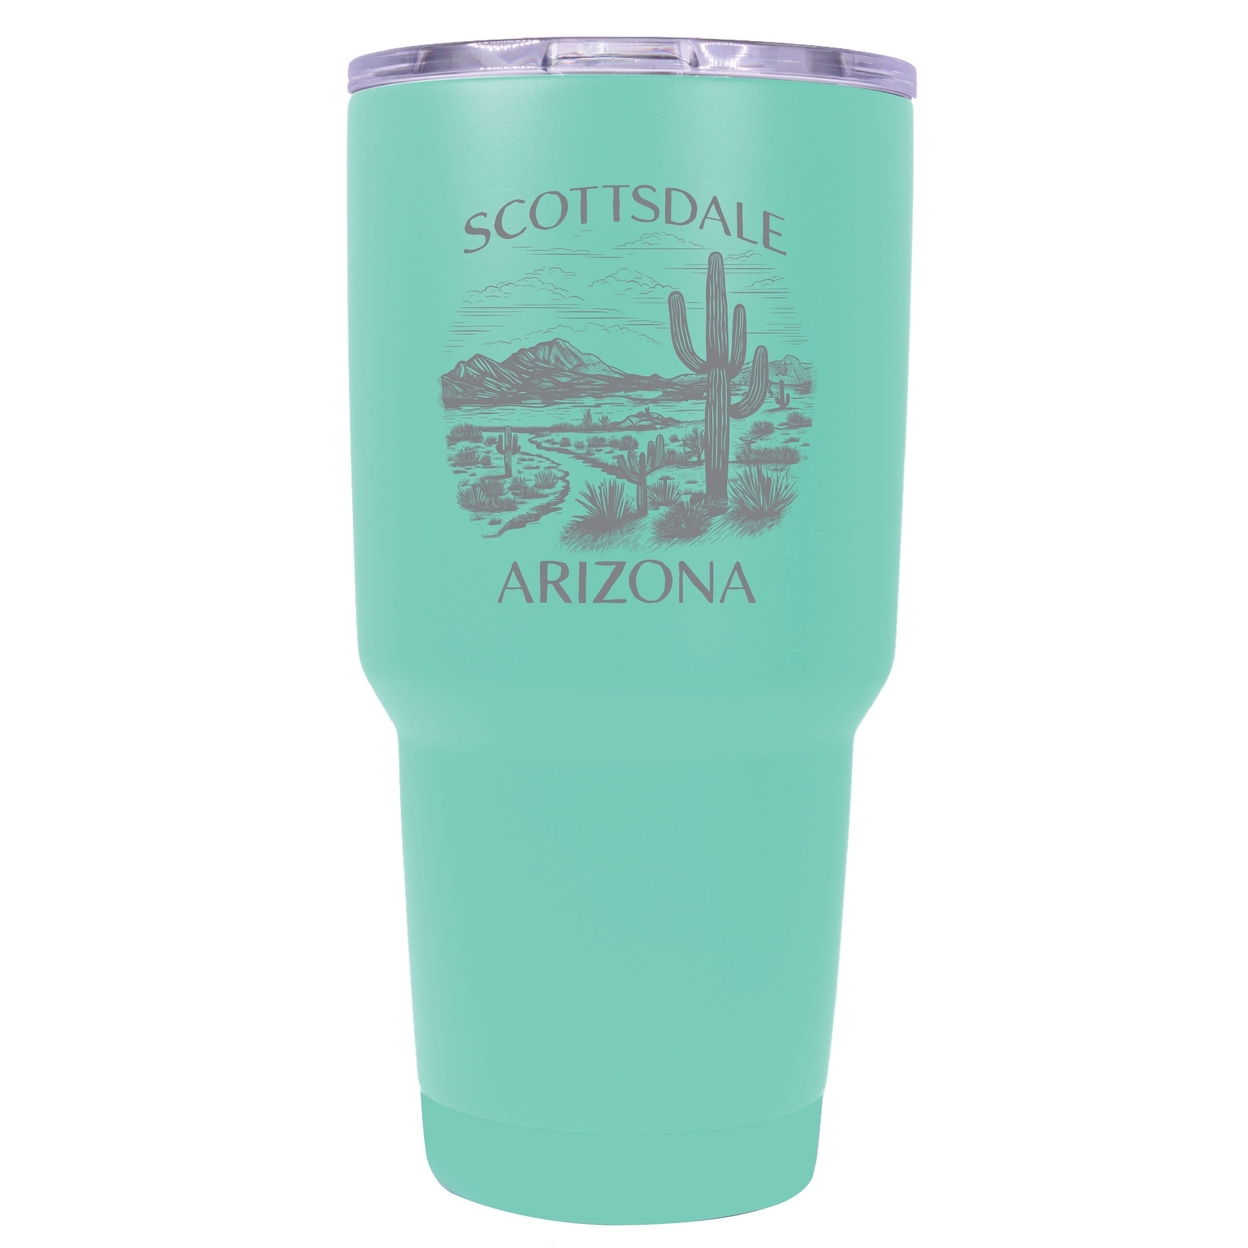 Scottsdale Arizona Souvenir 24 Oz Engraved Insulated Stainless Steel Tumbler - Red,,2-Pack